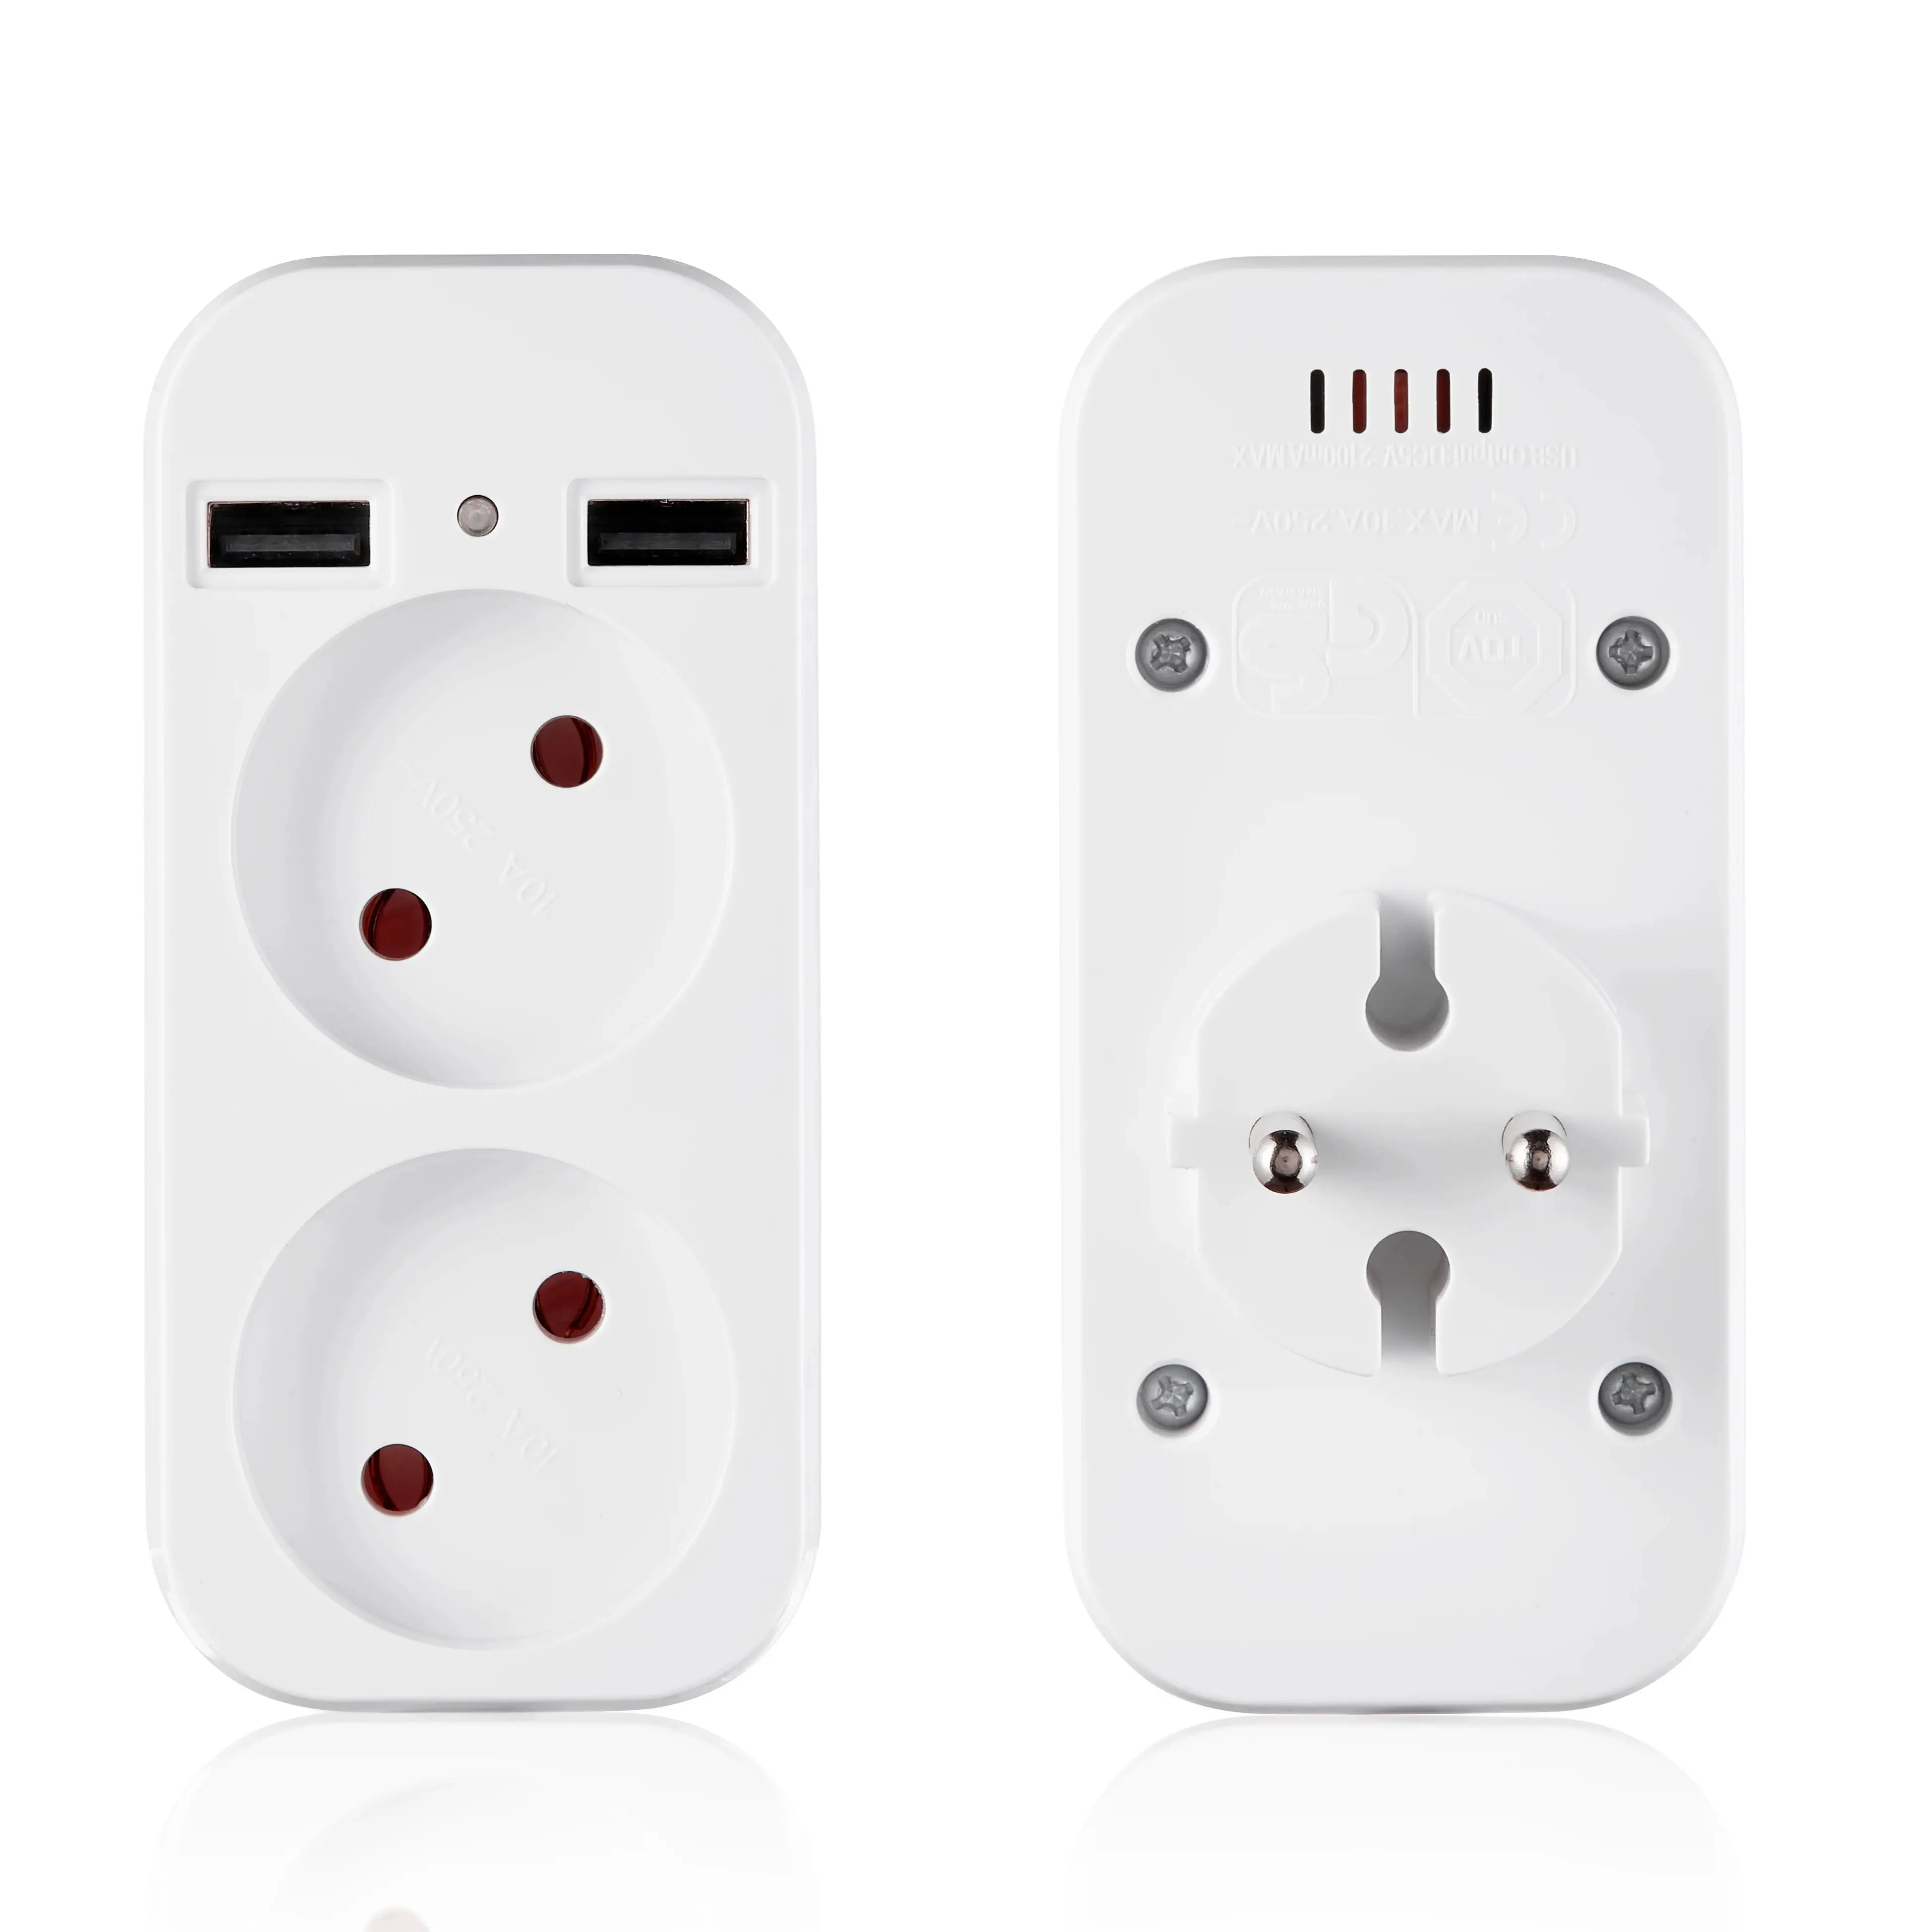 European style dual socket with dual USB 5V 2A output, plug adapter, free shipping